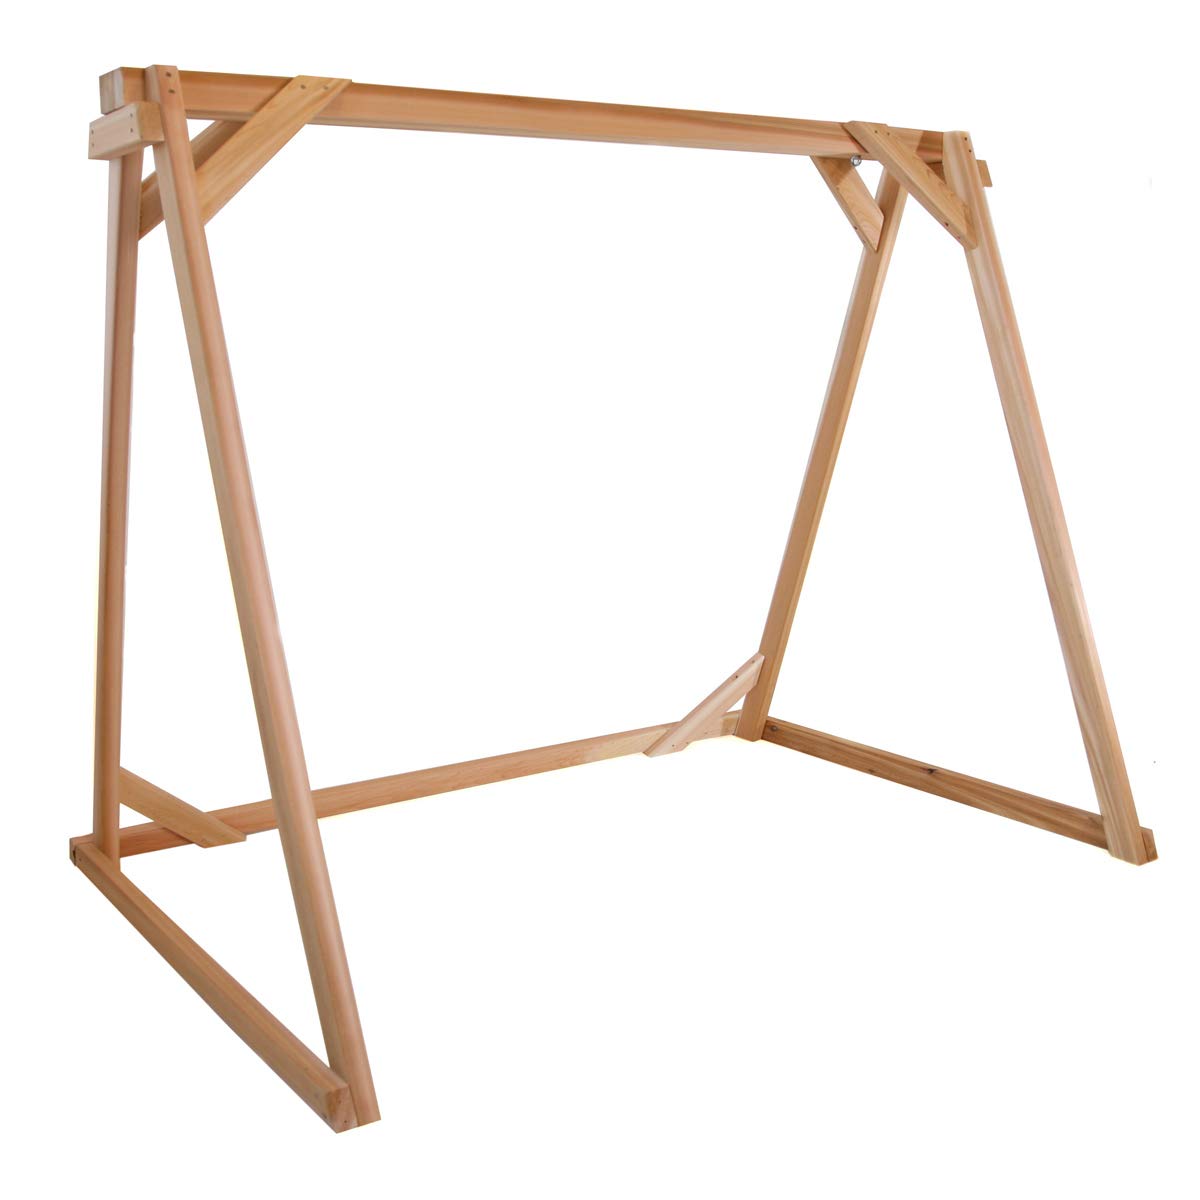 All Things Cedar AF90 Swing Frame | 8ft Premium Outdoor Swing Stand | Durable Porch Swing Frame with Swing Mounting Hardware | Handcrafted Cedar Wood Compatible with 60" Wide Swings 90x48x68